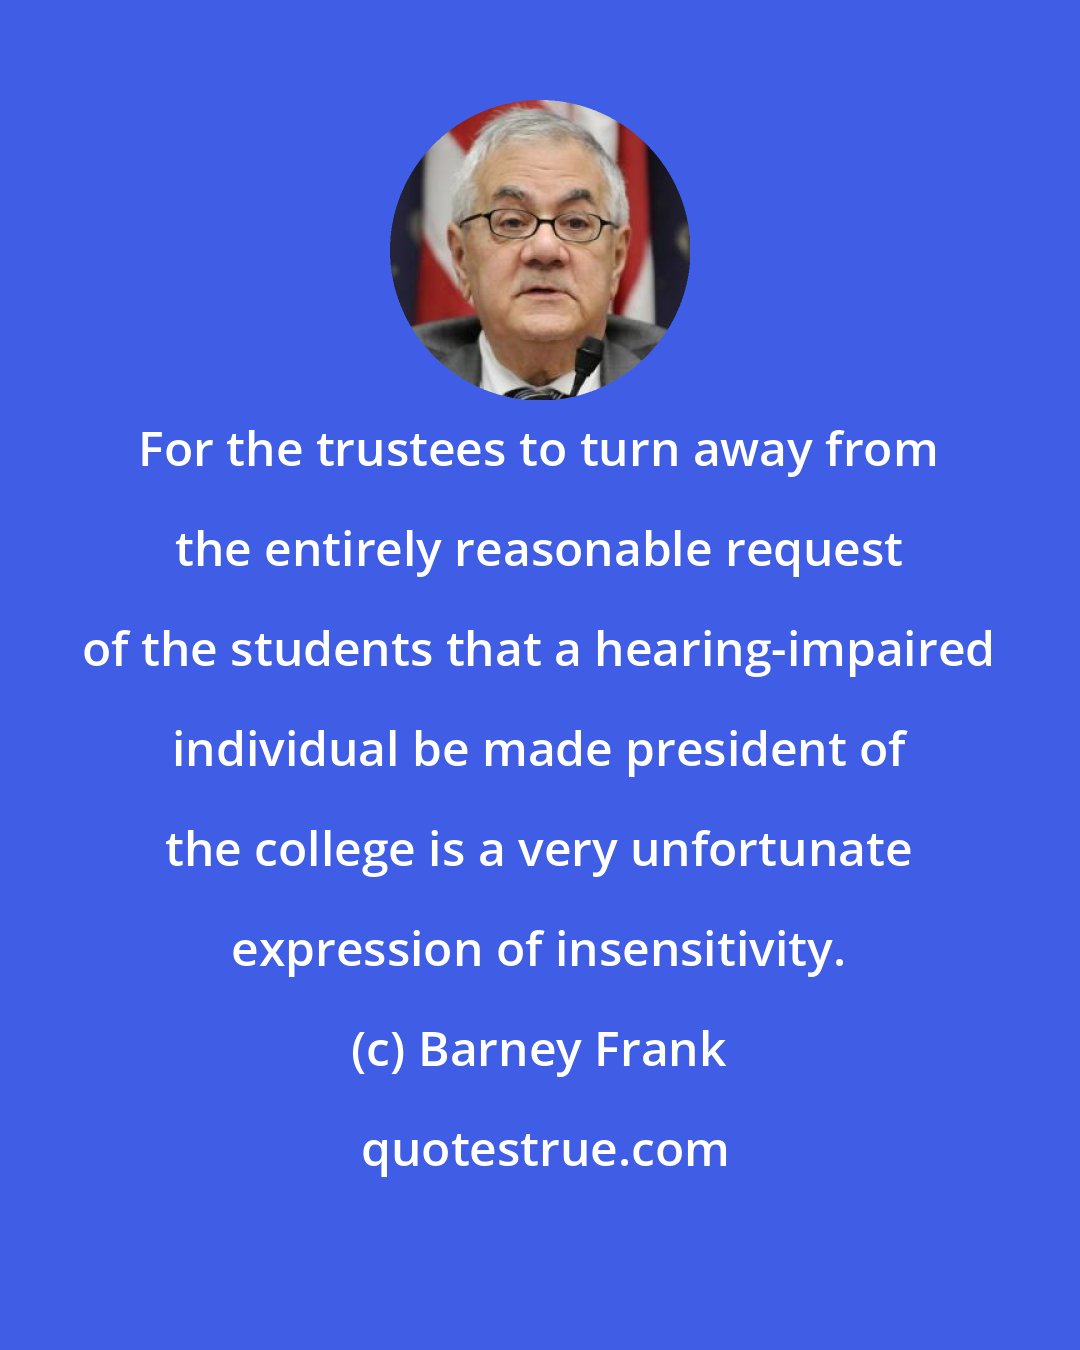 Barney Frank: For the trustees to turn away from the entirely reasonable request of the students that a hearing-impaired individual be made president of the college is a very unfortunate expression of insensitivity.